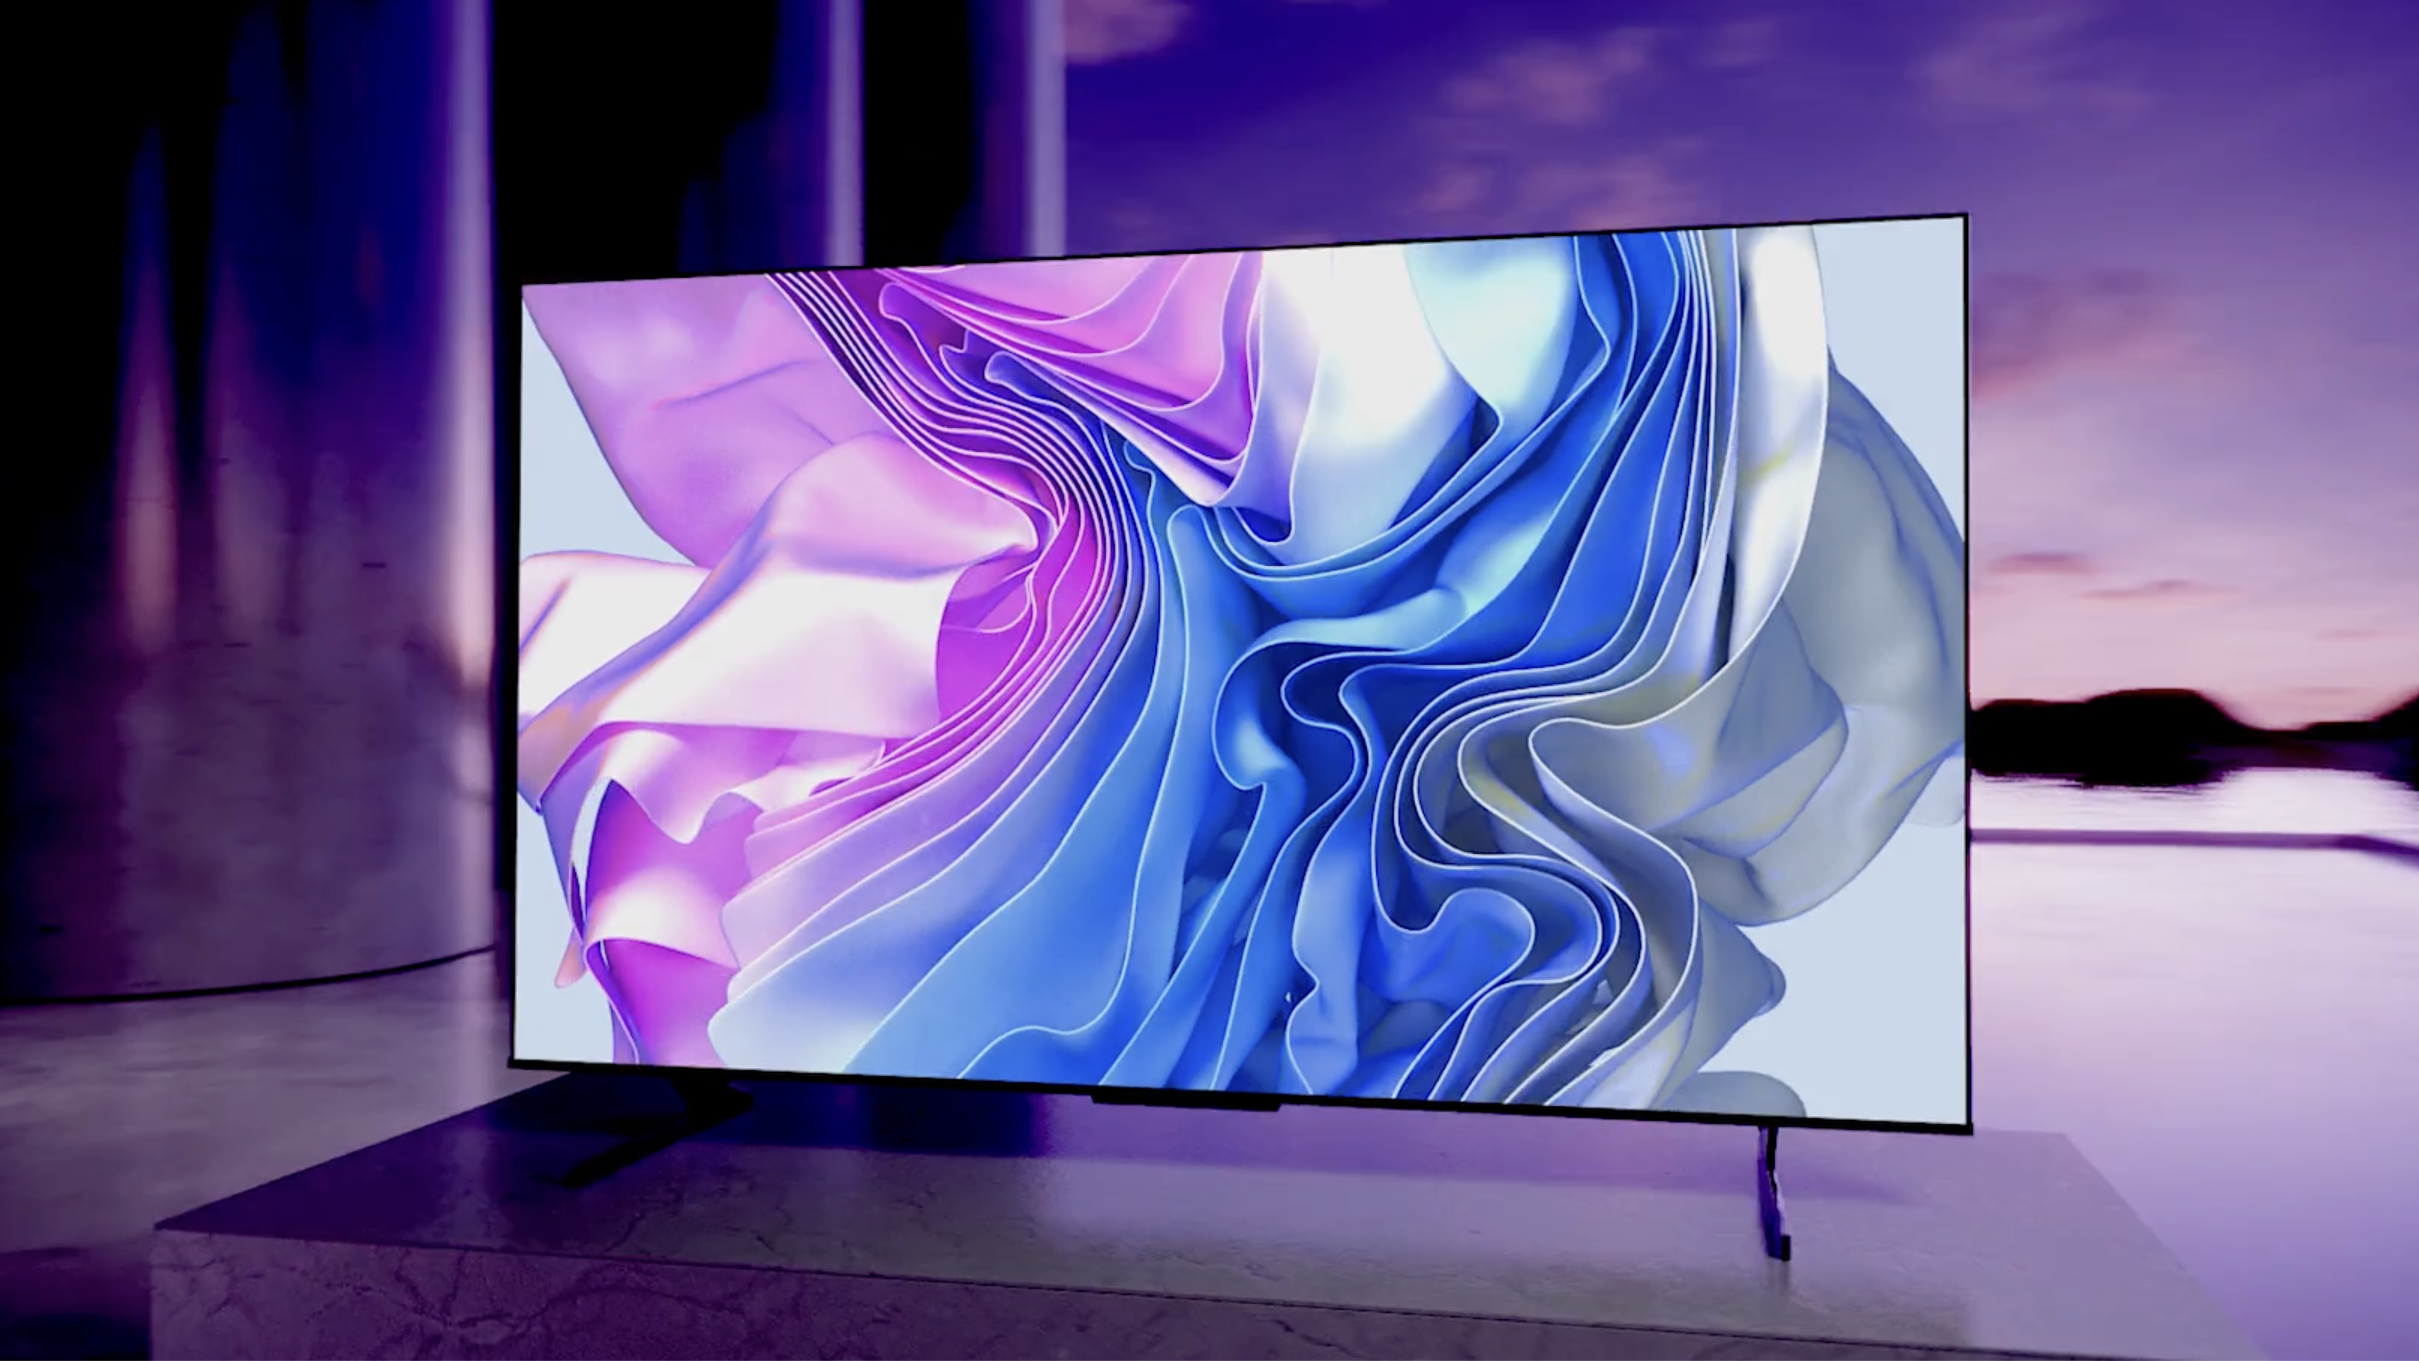 The Hisense U8H TV displaying abstract pink and blue patterns